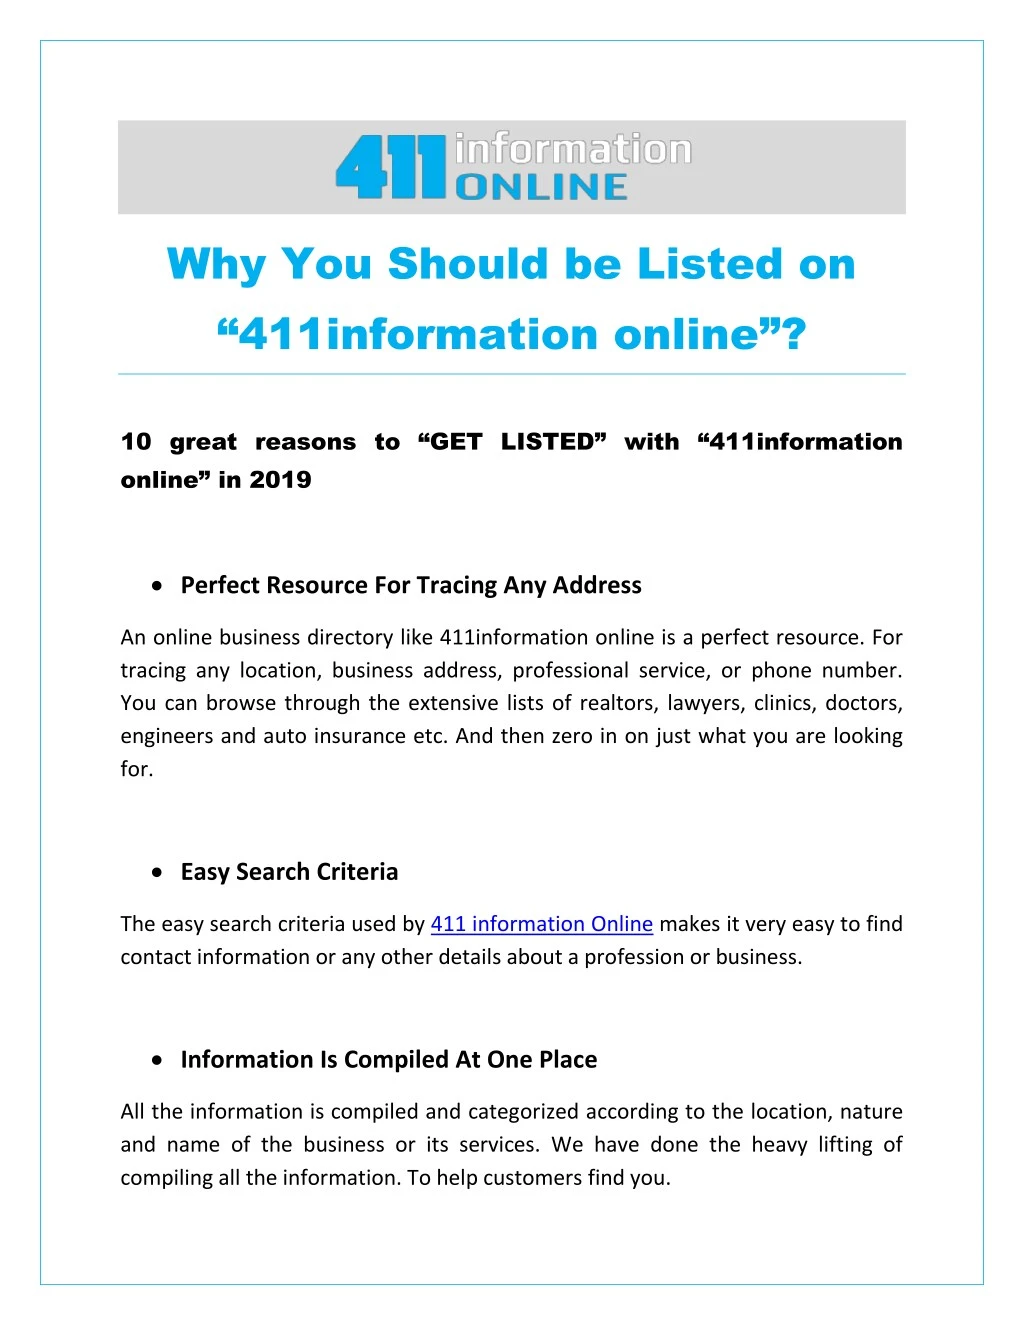 why you should be listed on 411information online